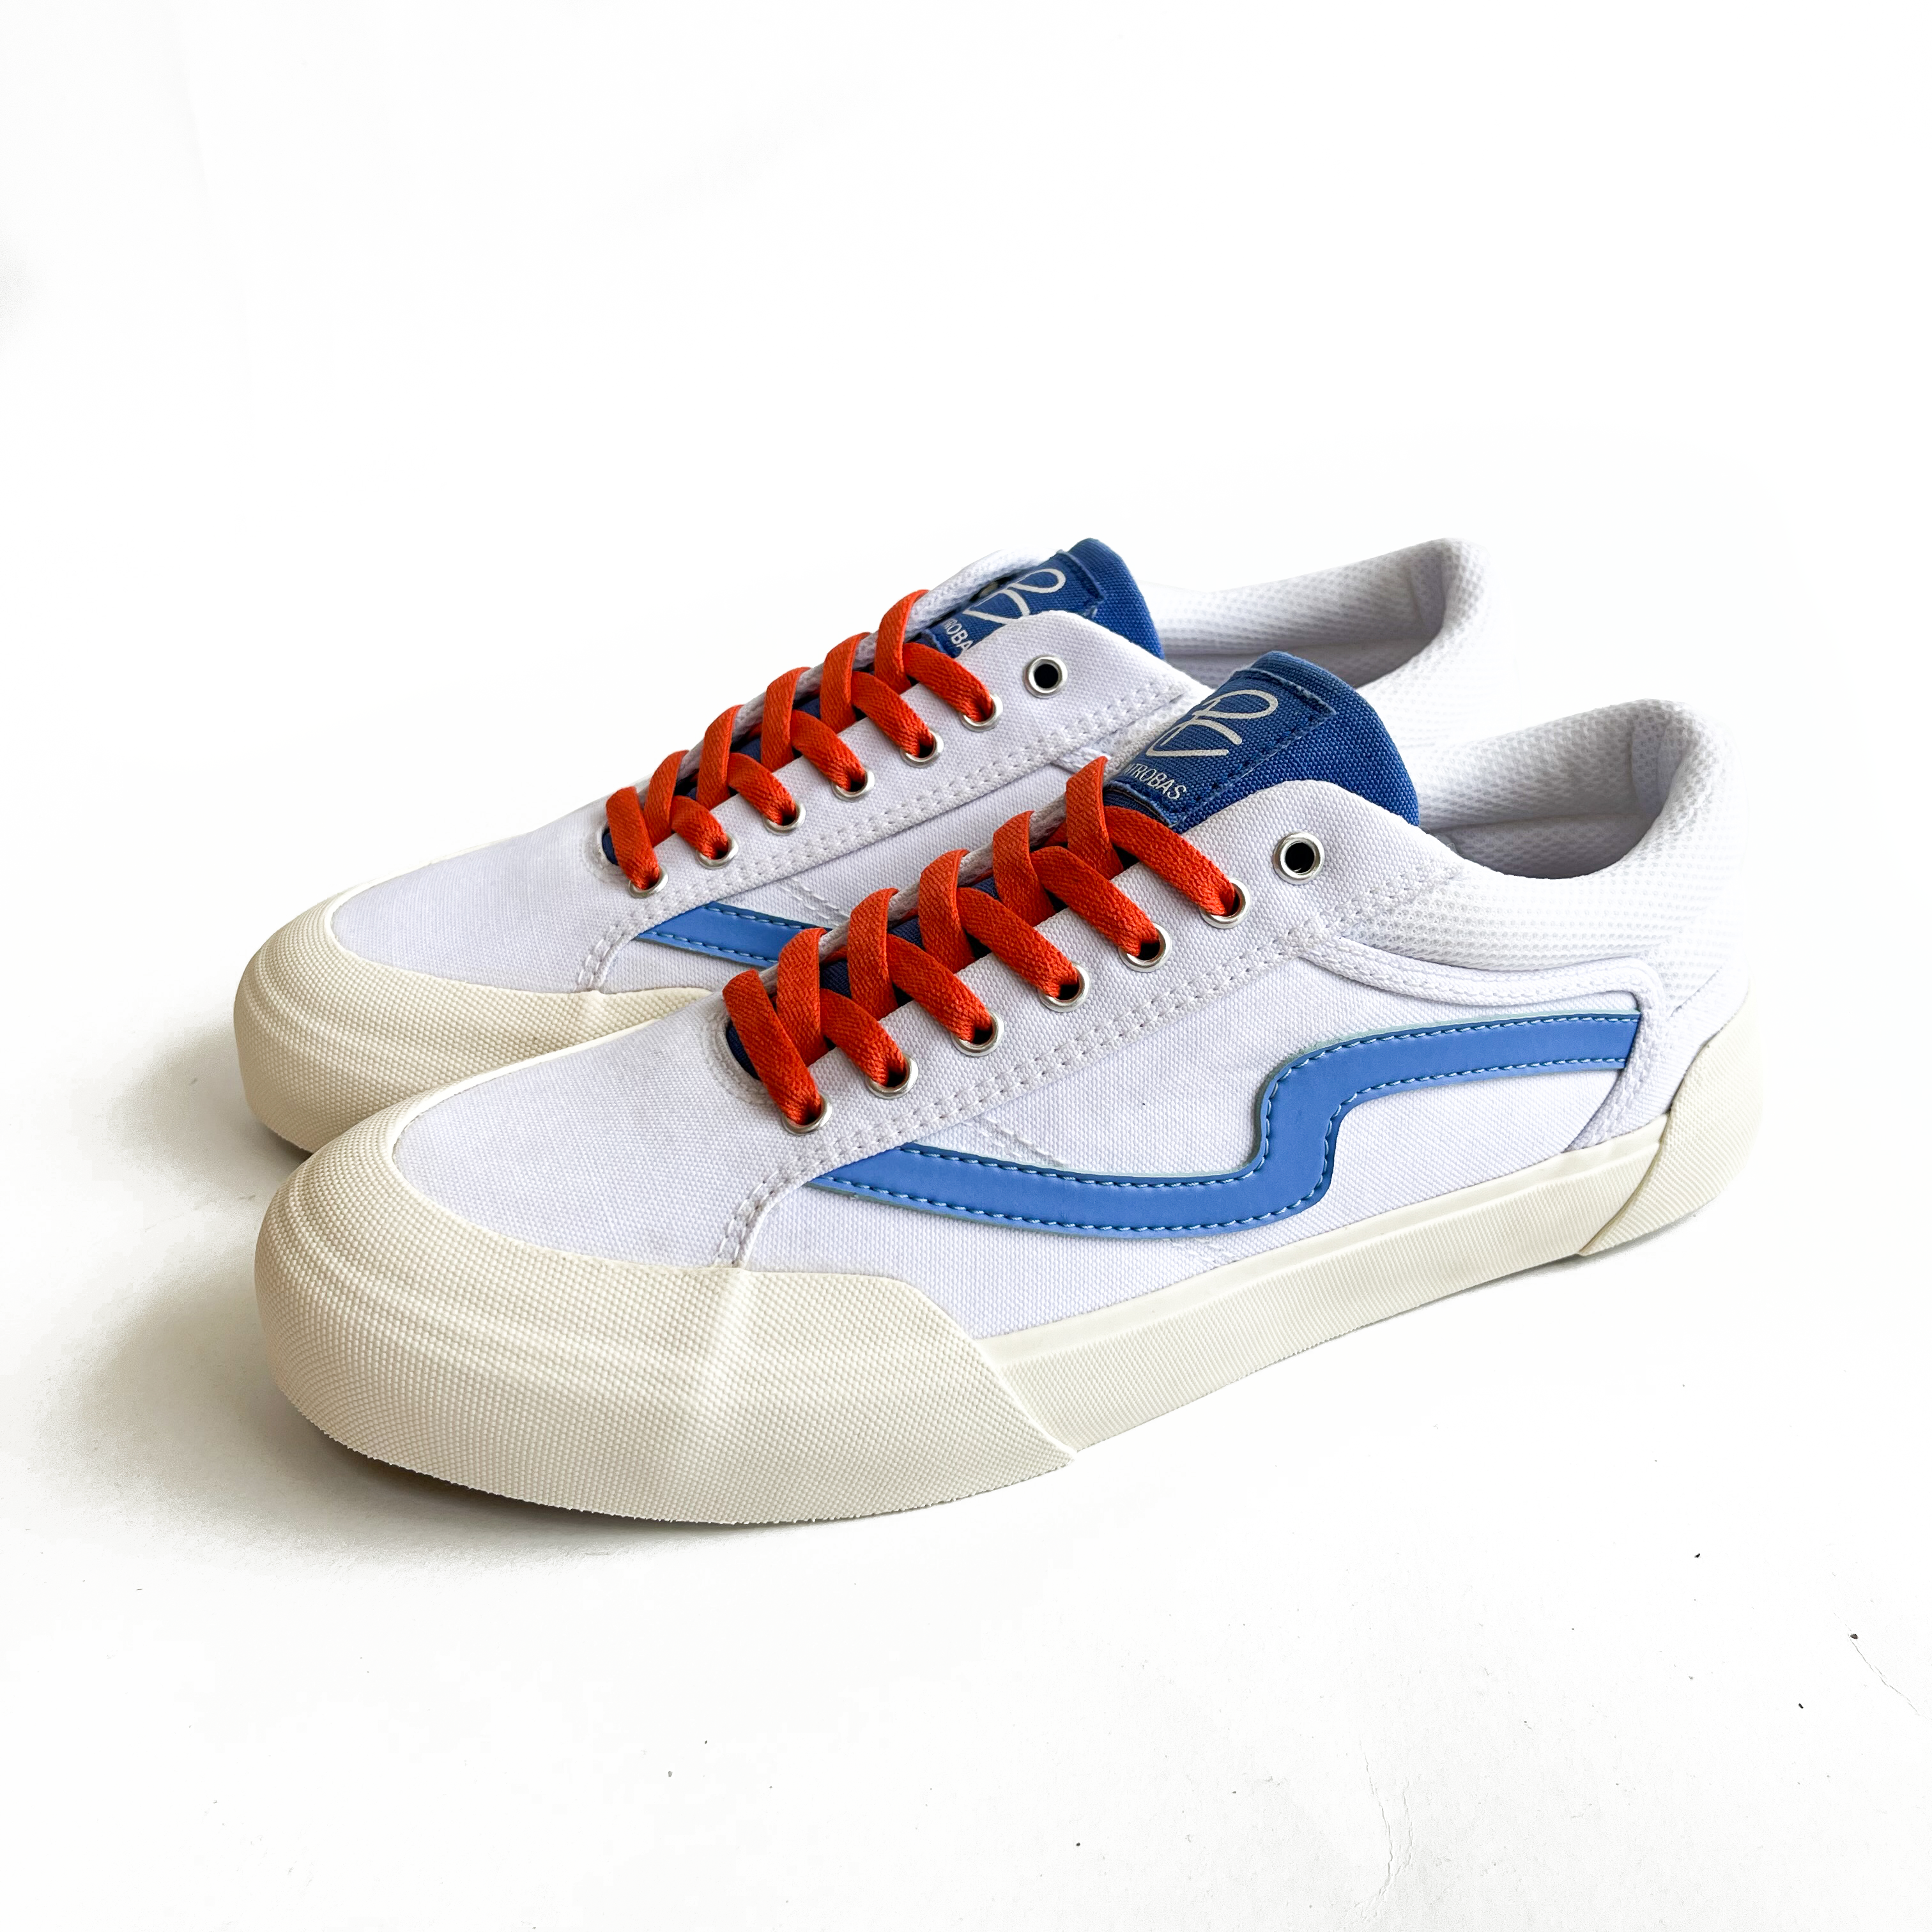 Cloud White Blue Sneakers